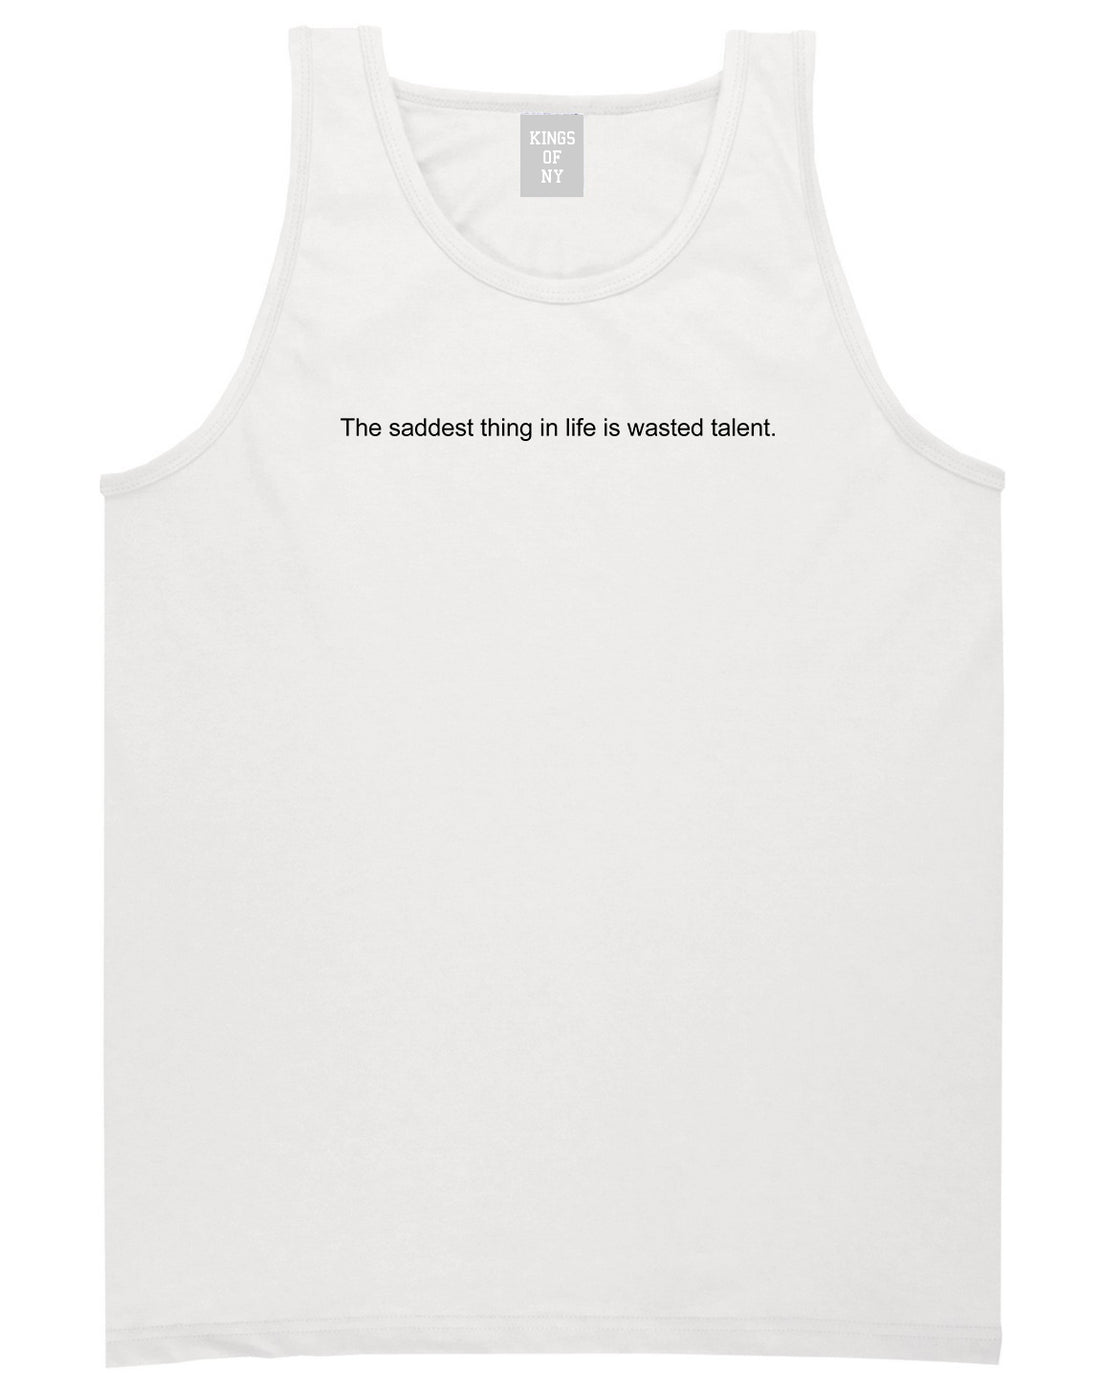 The Saddest Thing In Life Is Wasted Talent Mens Tank Top Shirt White